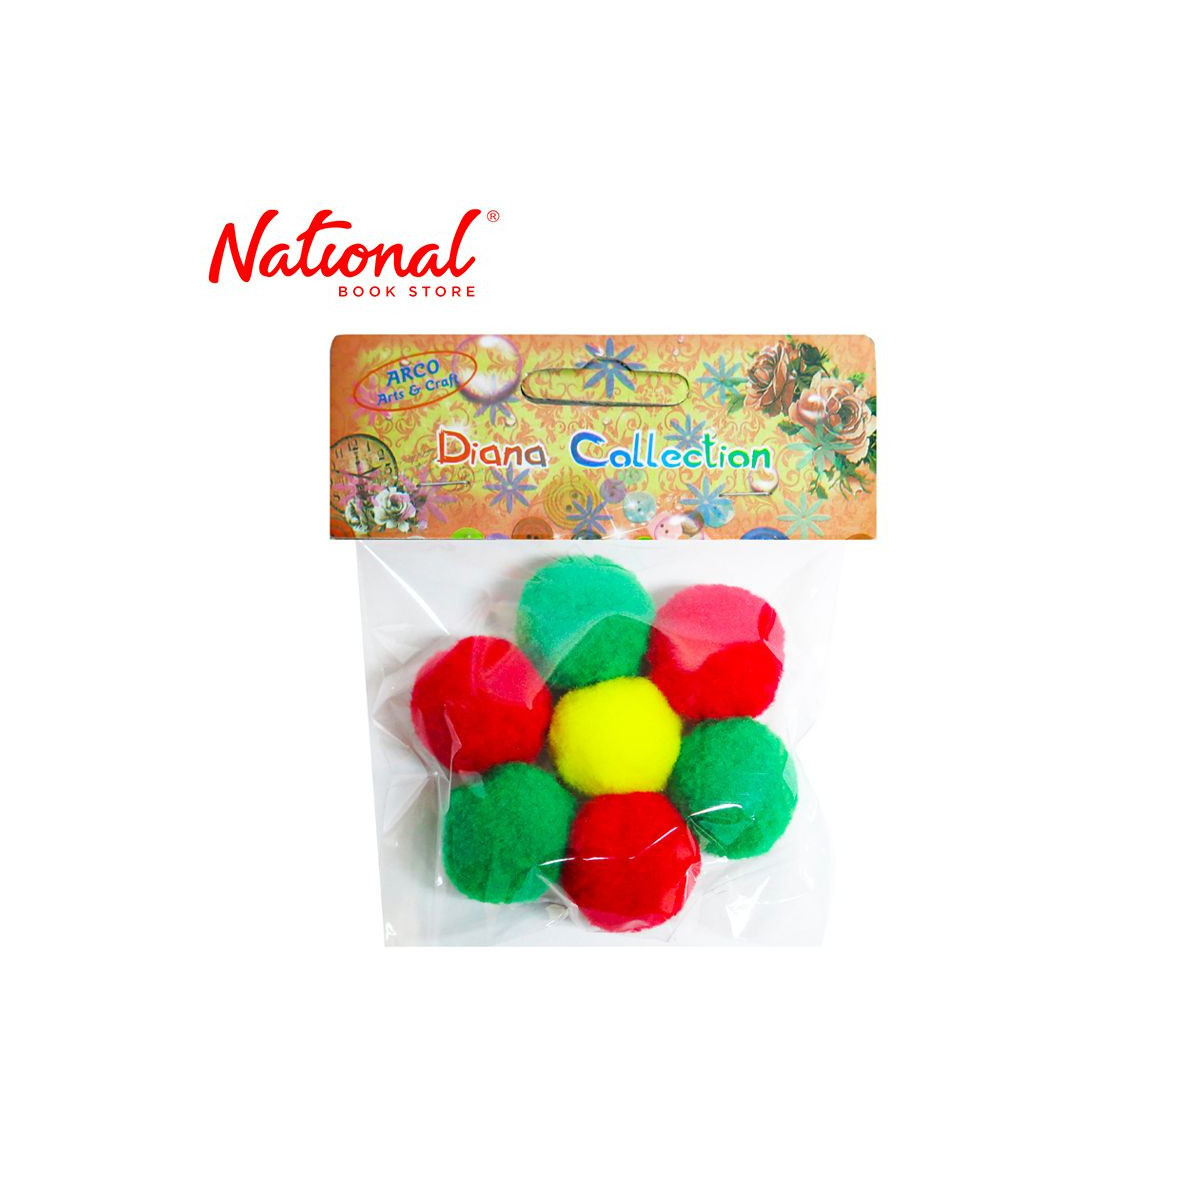 Diana Scrapbook Accessories - Red And Green Pom Poms E3858 - Scrapbooking Accessories